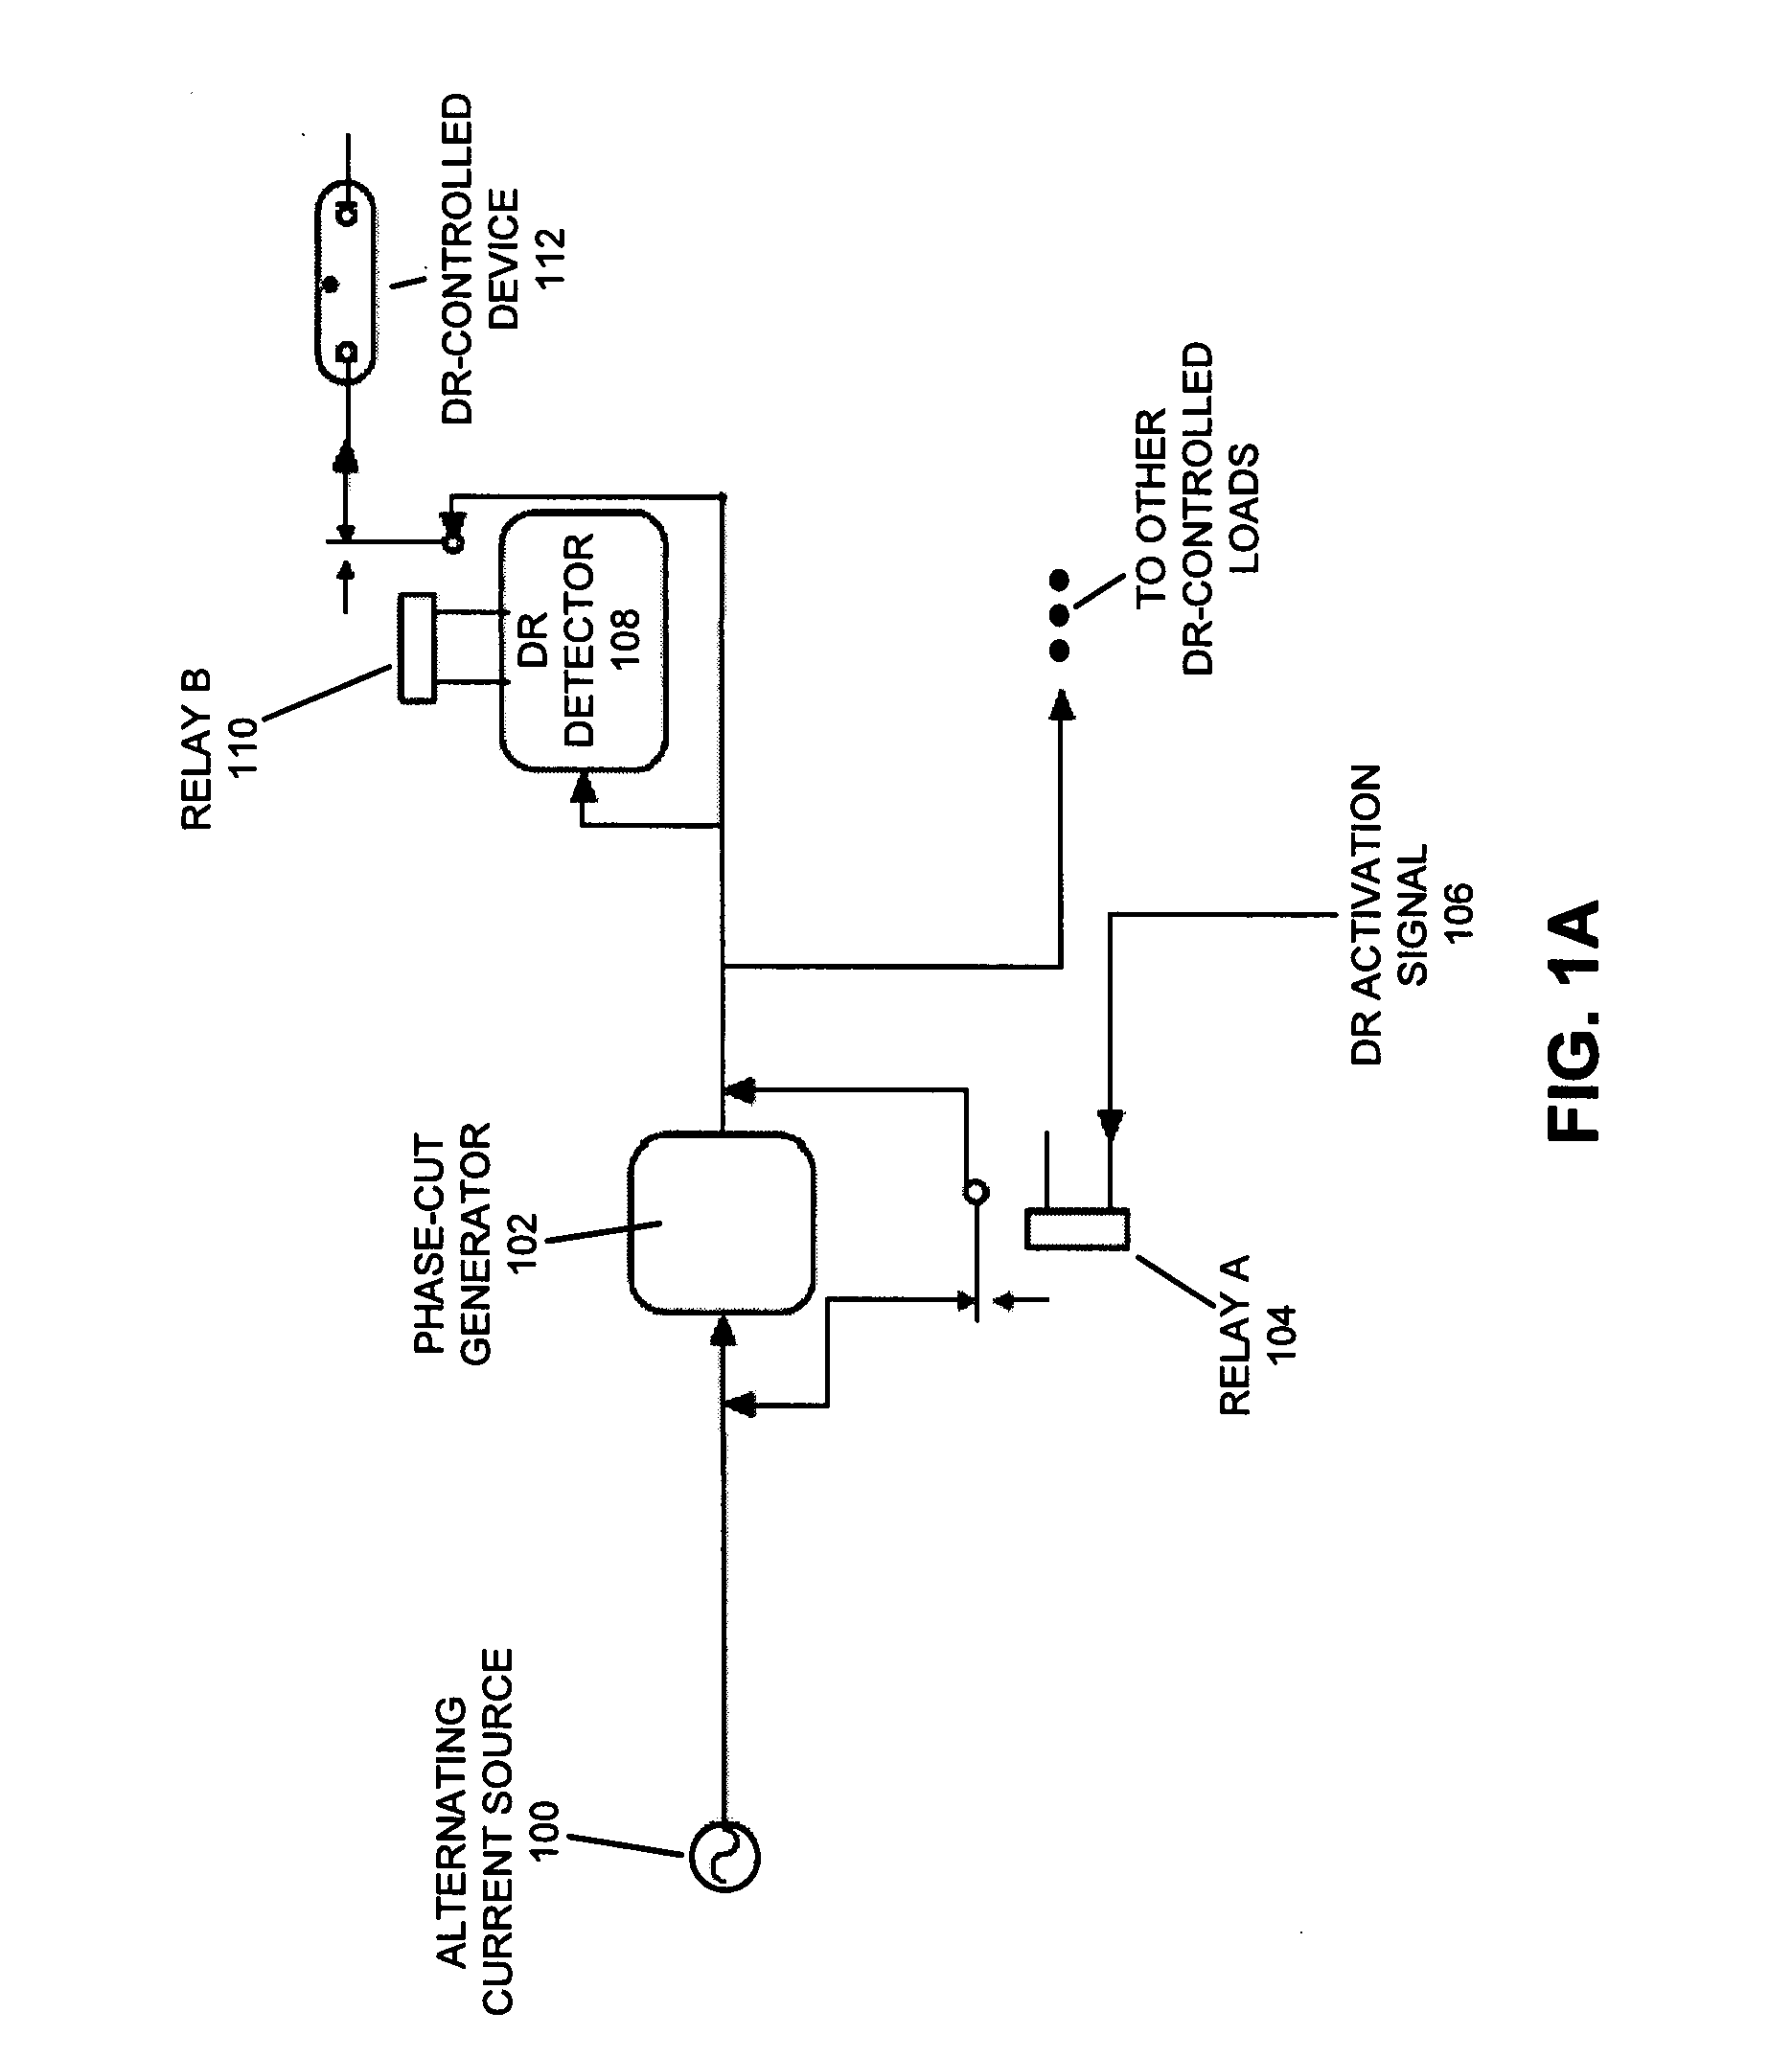 Method and apparatus for using power-line phase-cut signaling to change energy usage